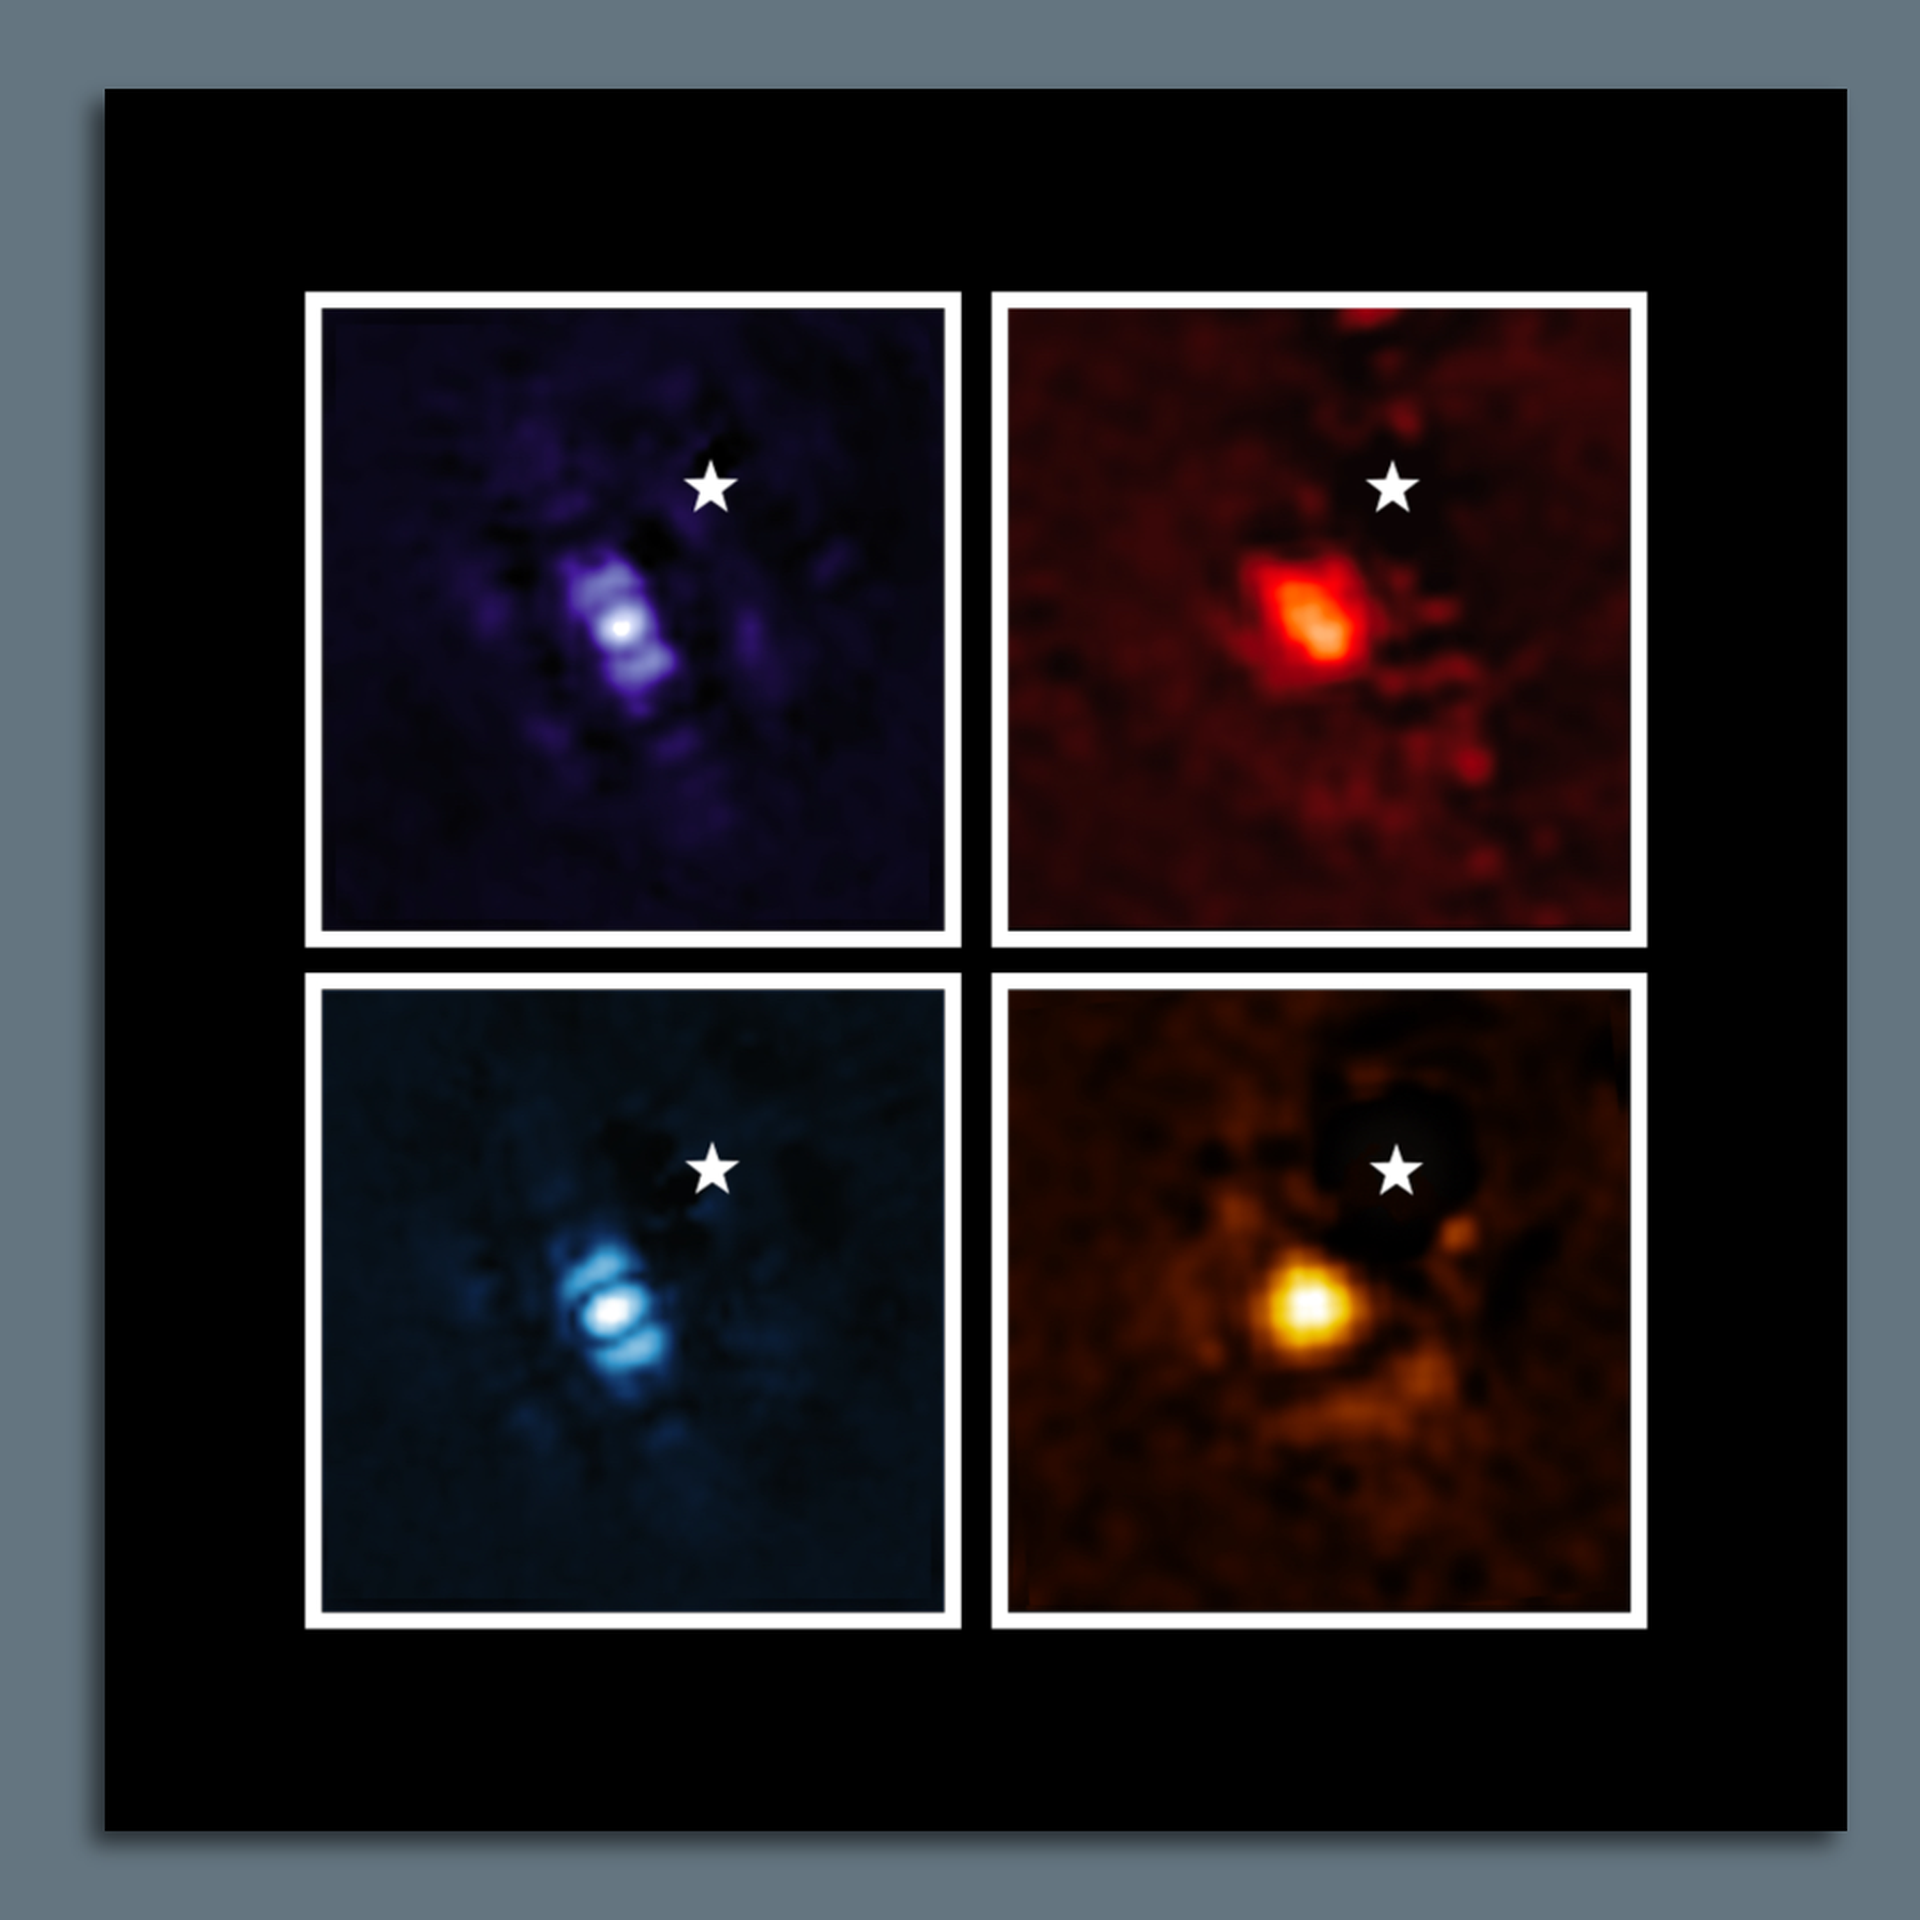 JWST captures its first direct image of a planet outside our solar system